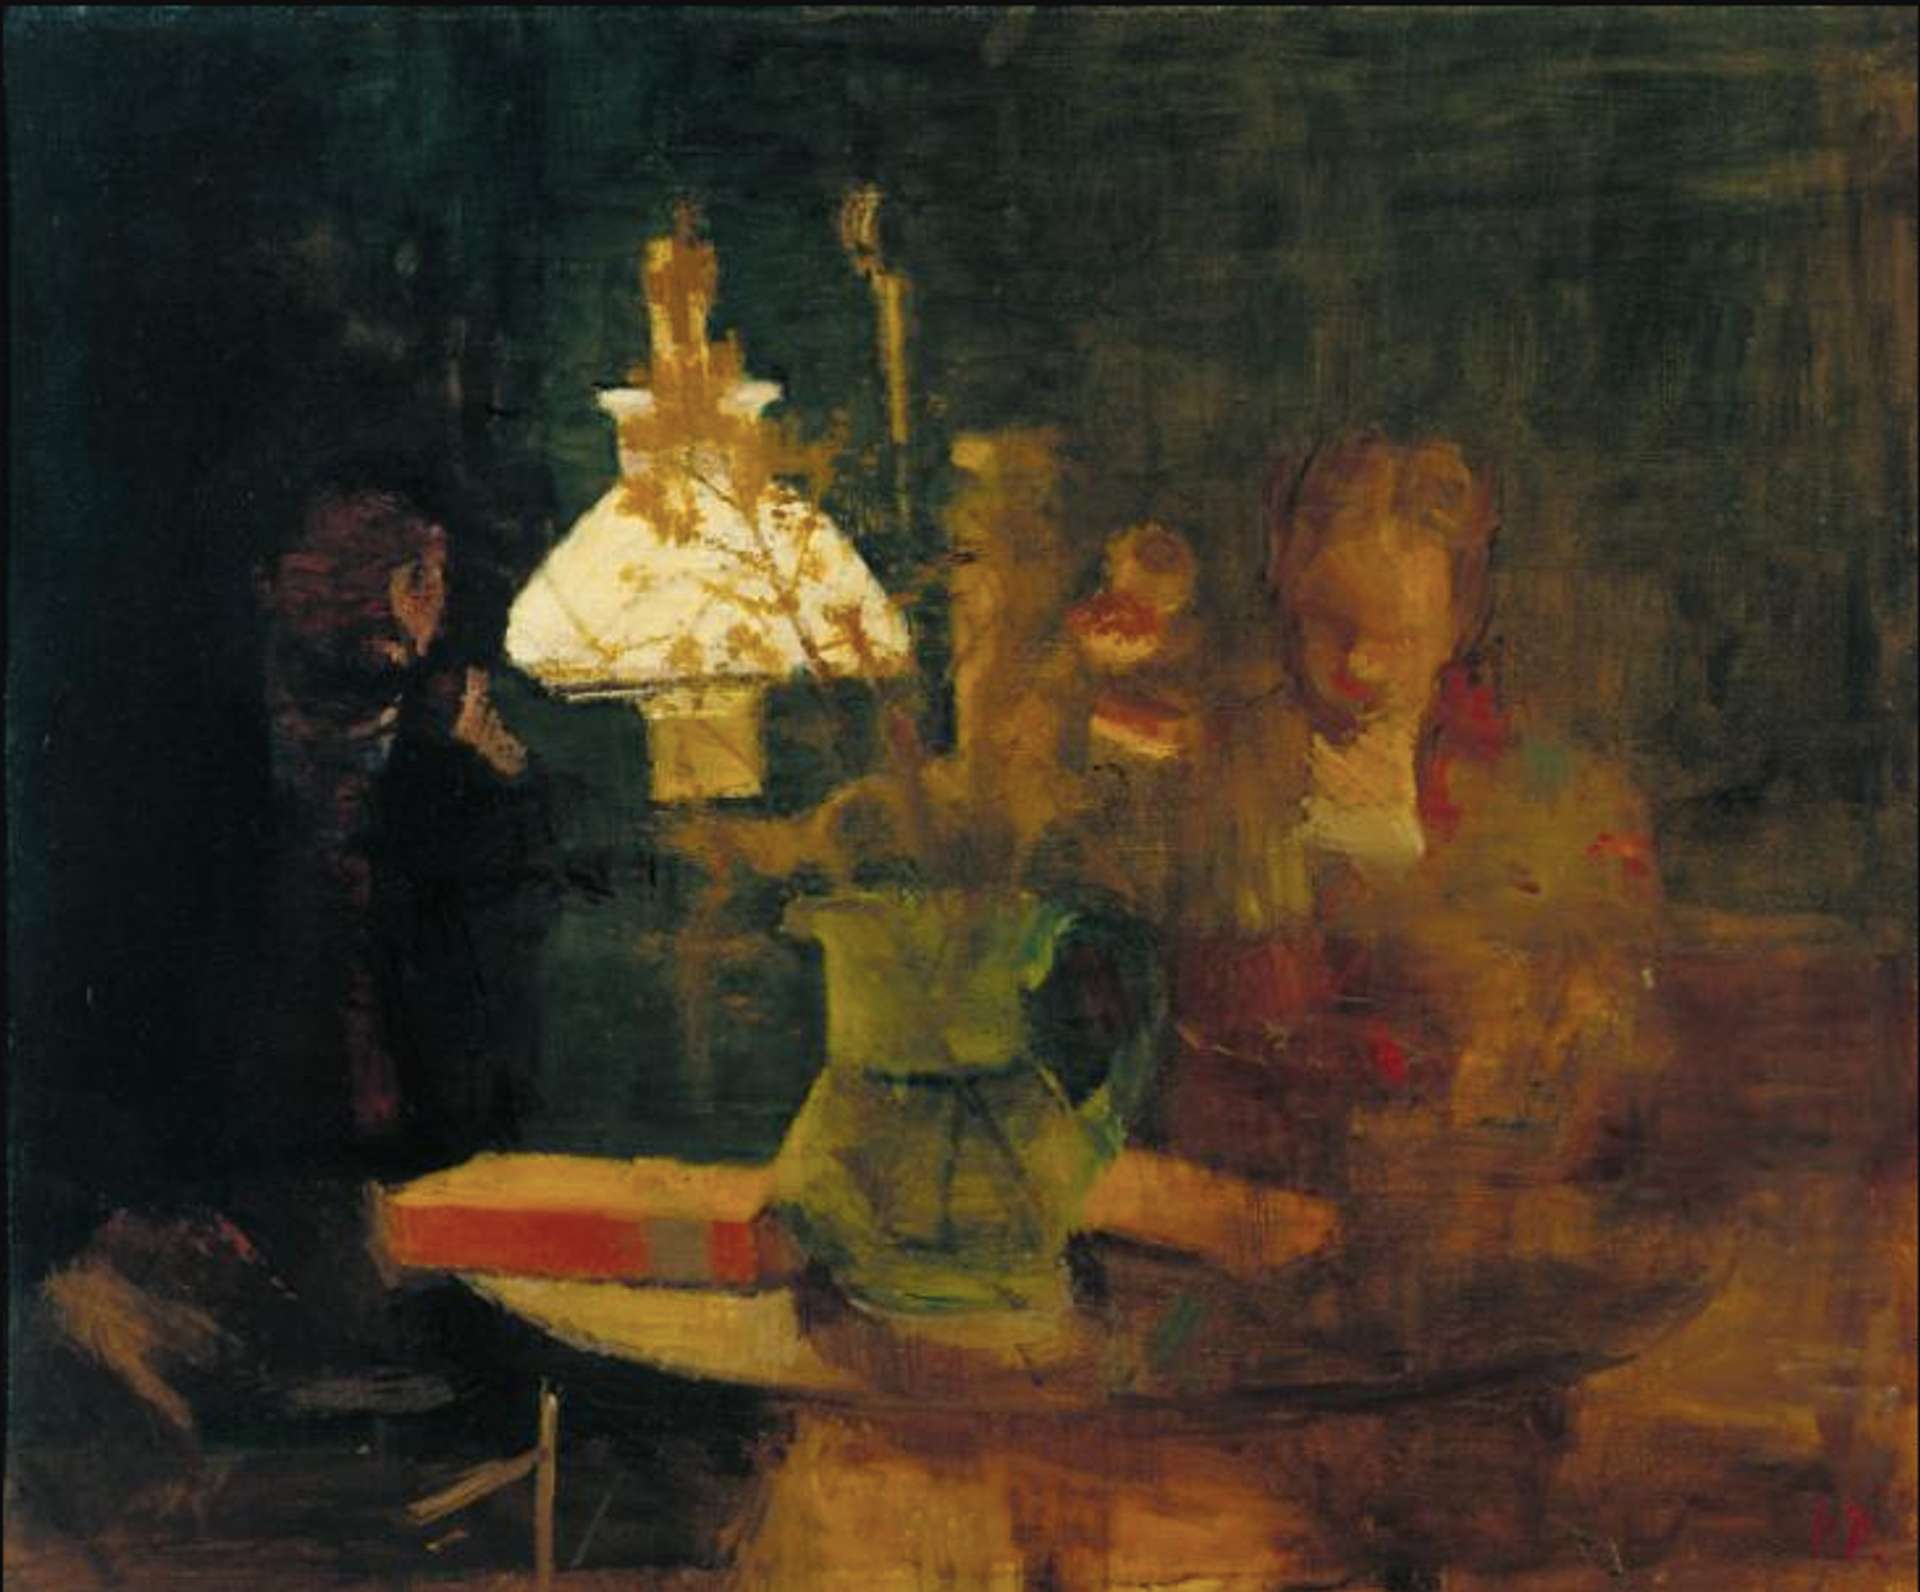 An oil painting titled "Lamplight" by Victor Pasmore, depicting a dimly lit room with a table and a chair, illuminated by a lamp on the table.